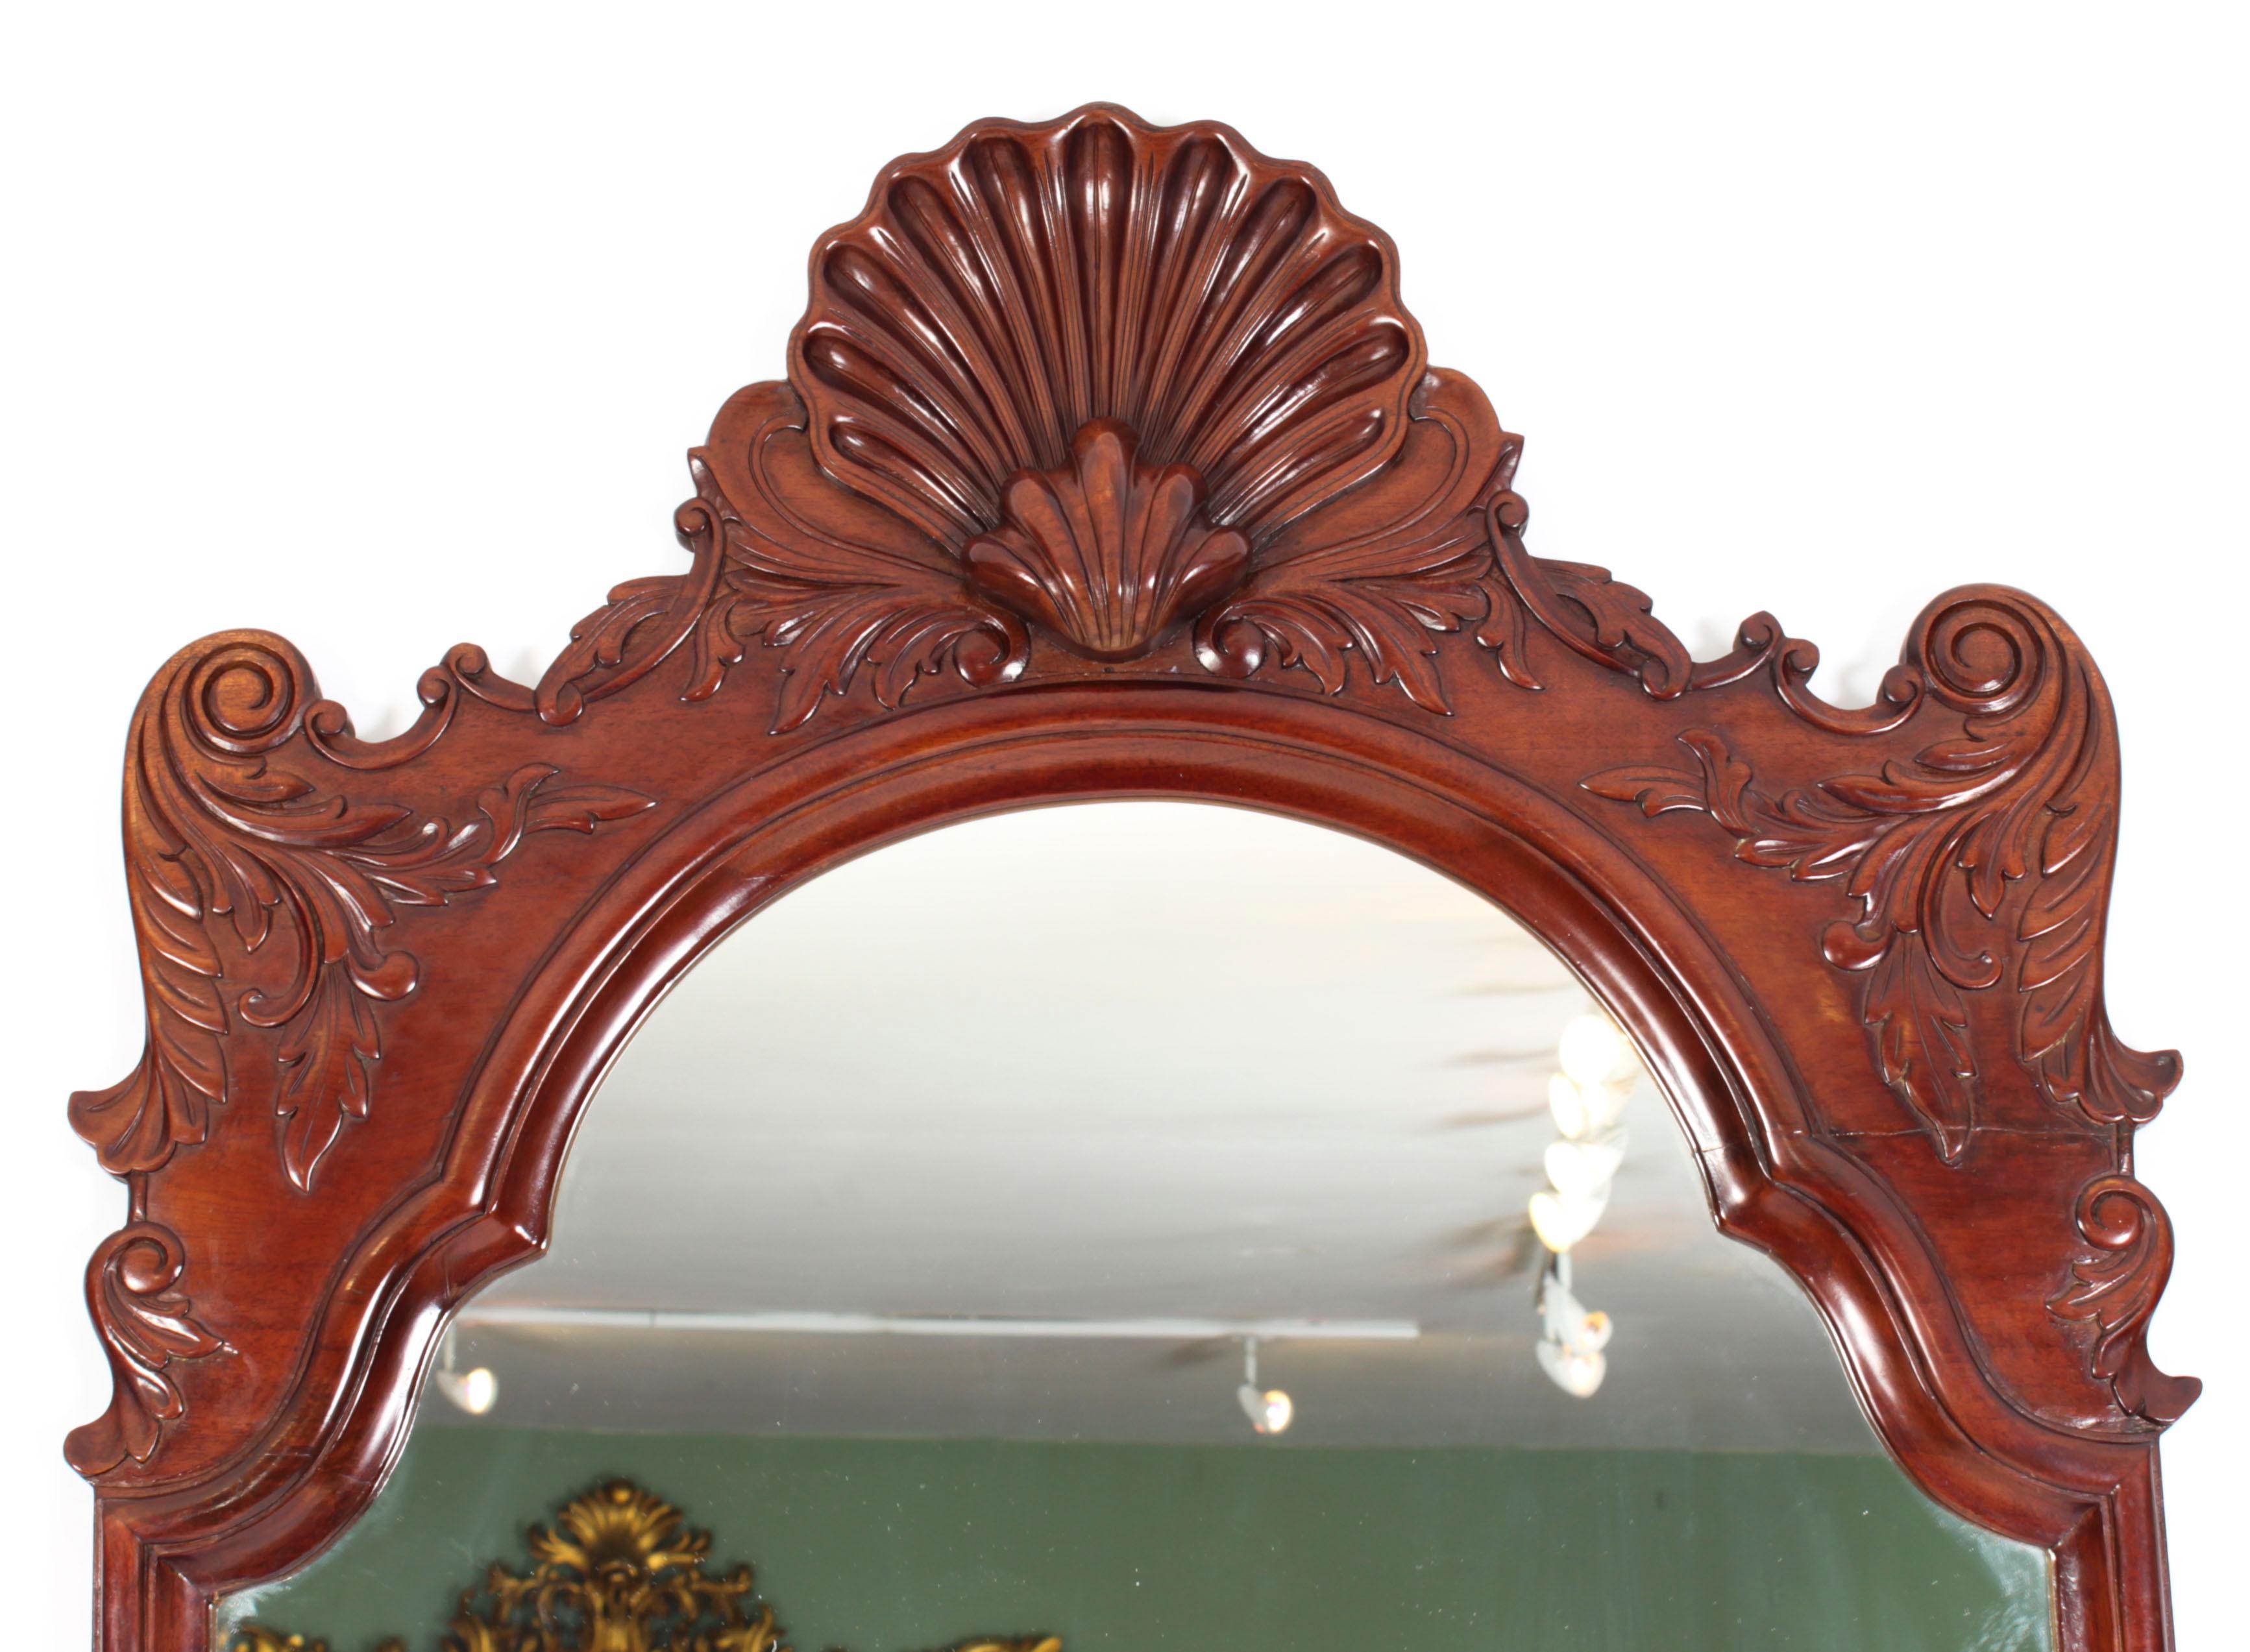 This is a superb contemporary  mirror, dating from the mid 20th Century.

The mirror plate is within a boldly-carved mahogany frame with scrolling foliate and decoration.

This is a very decorative item which will look amazing in any room.

THE